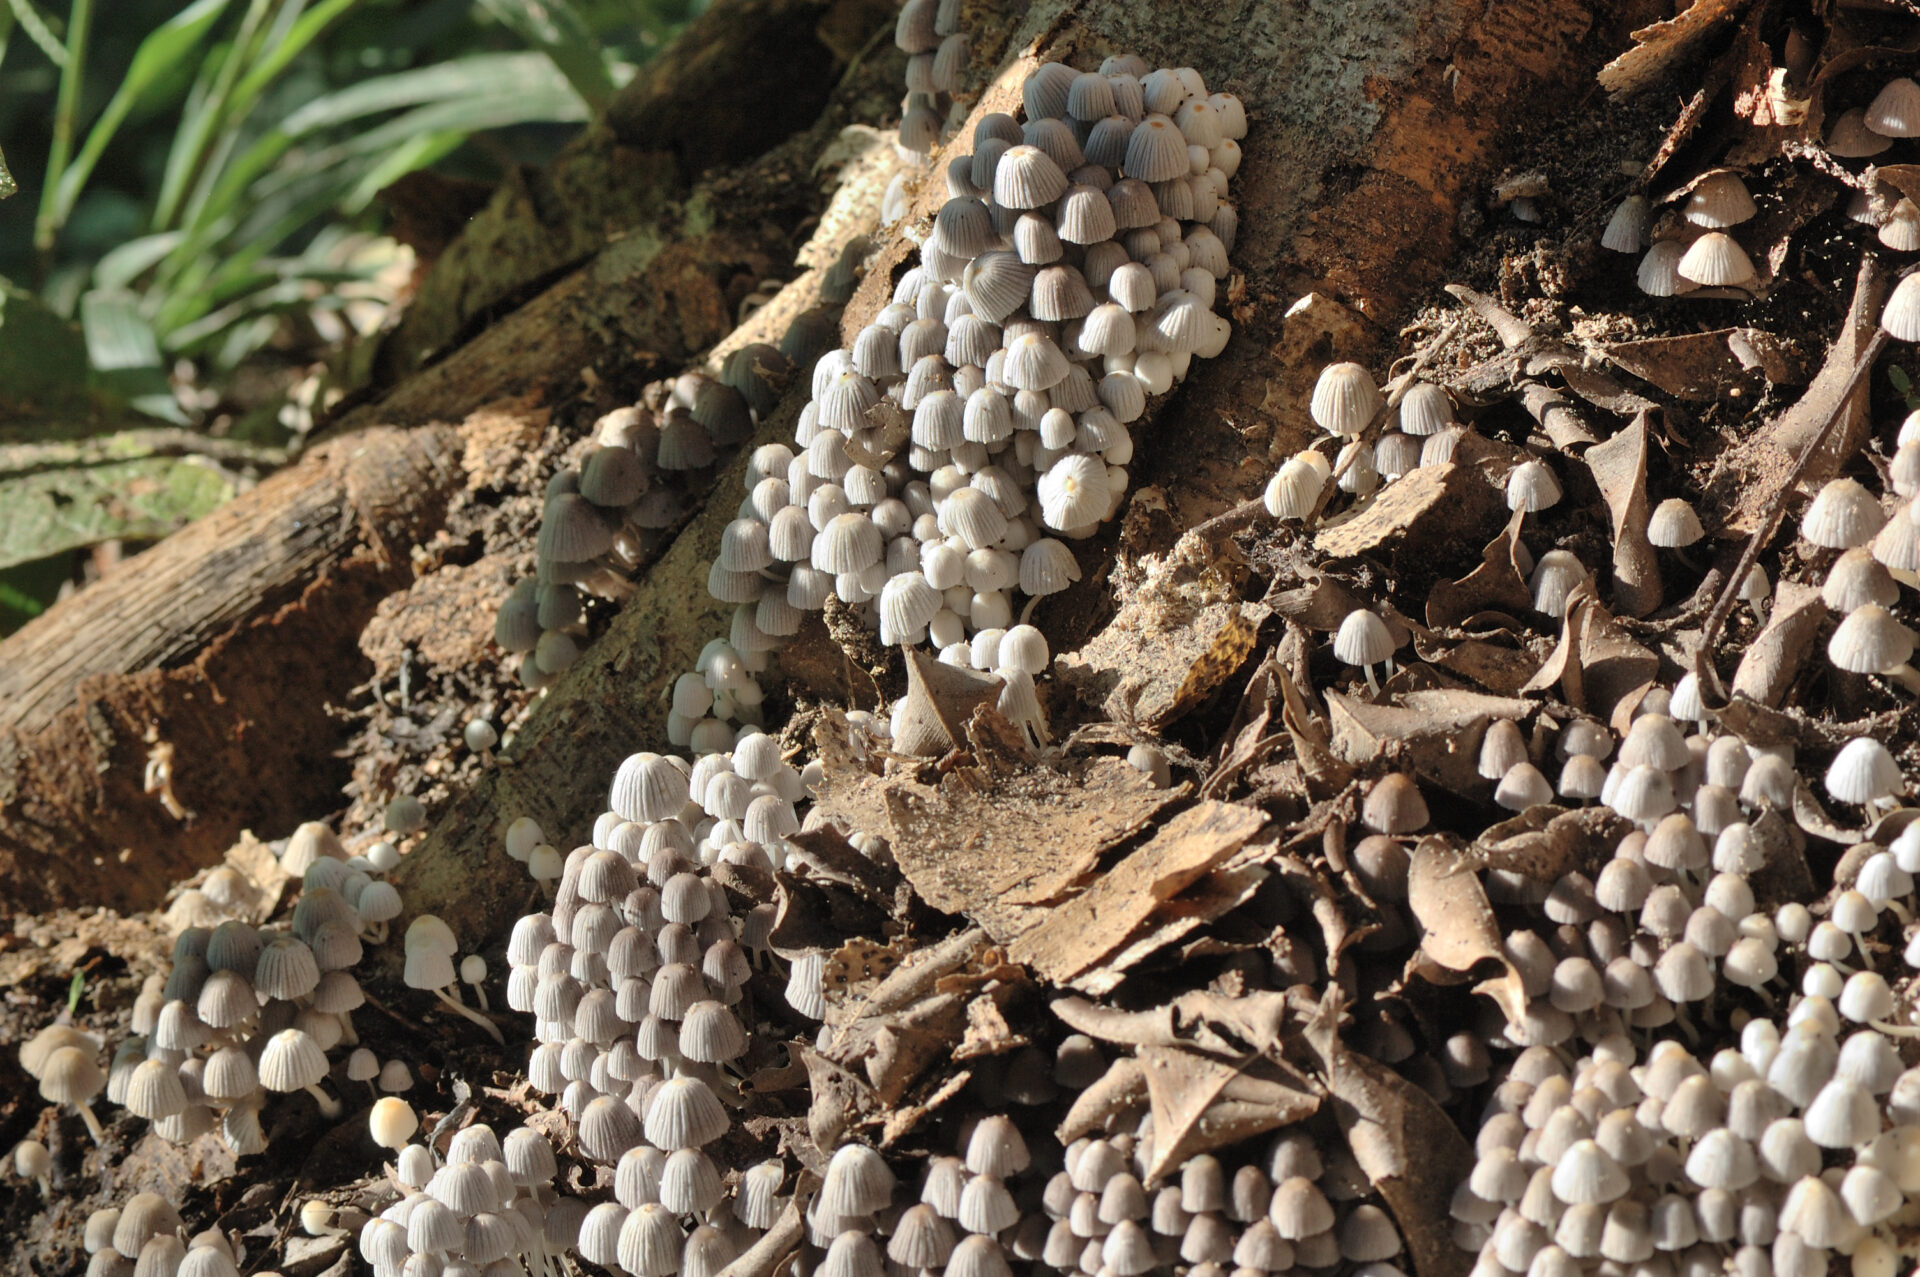 A large cluster of white coloured mushrooms sprouting up from leaf litter at the base of a tree.